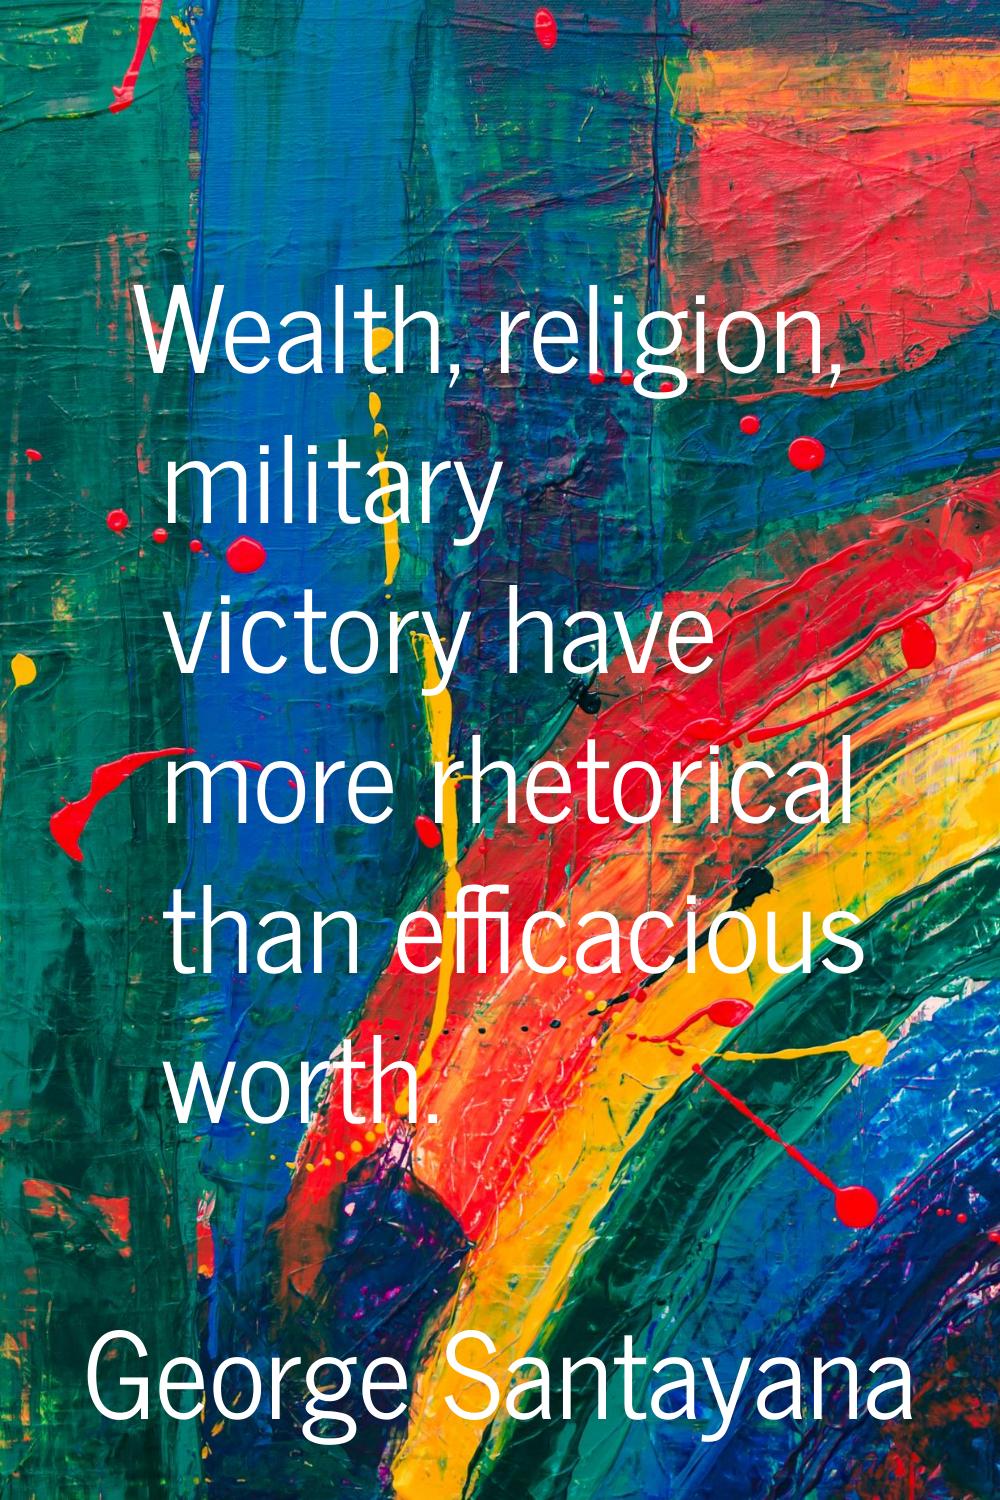 Wealth, religion, military victory have more rhetorical than efficacious worth.